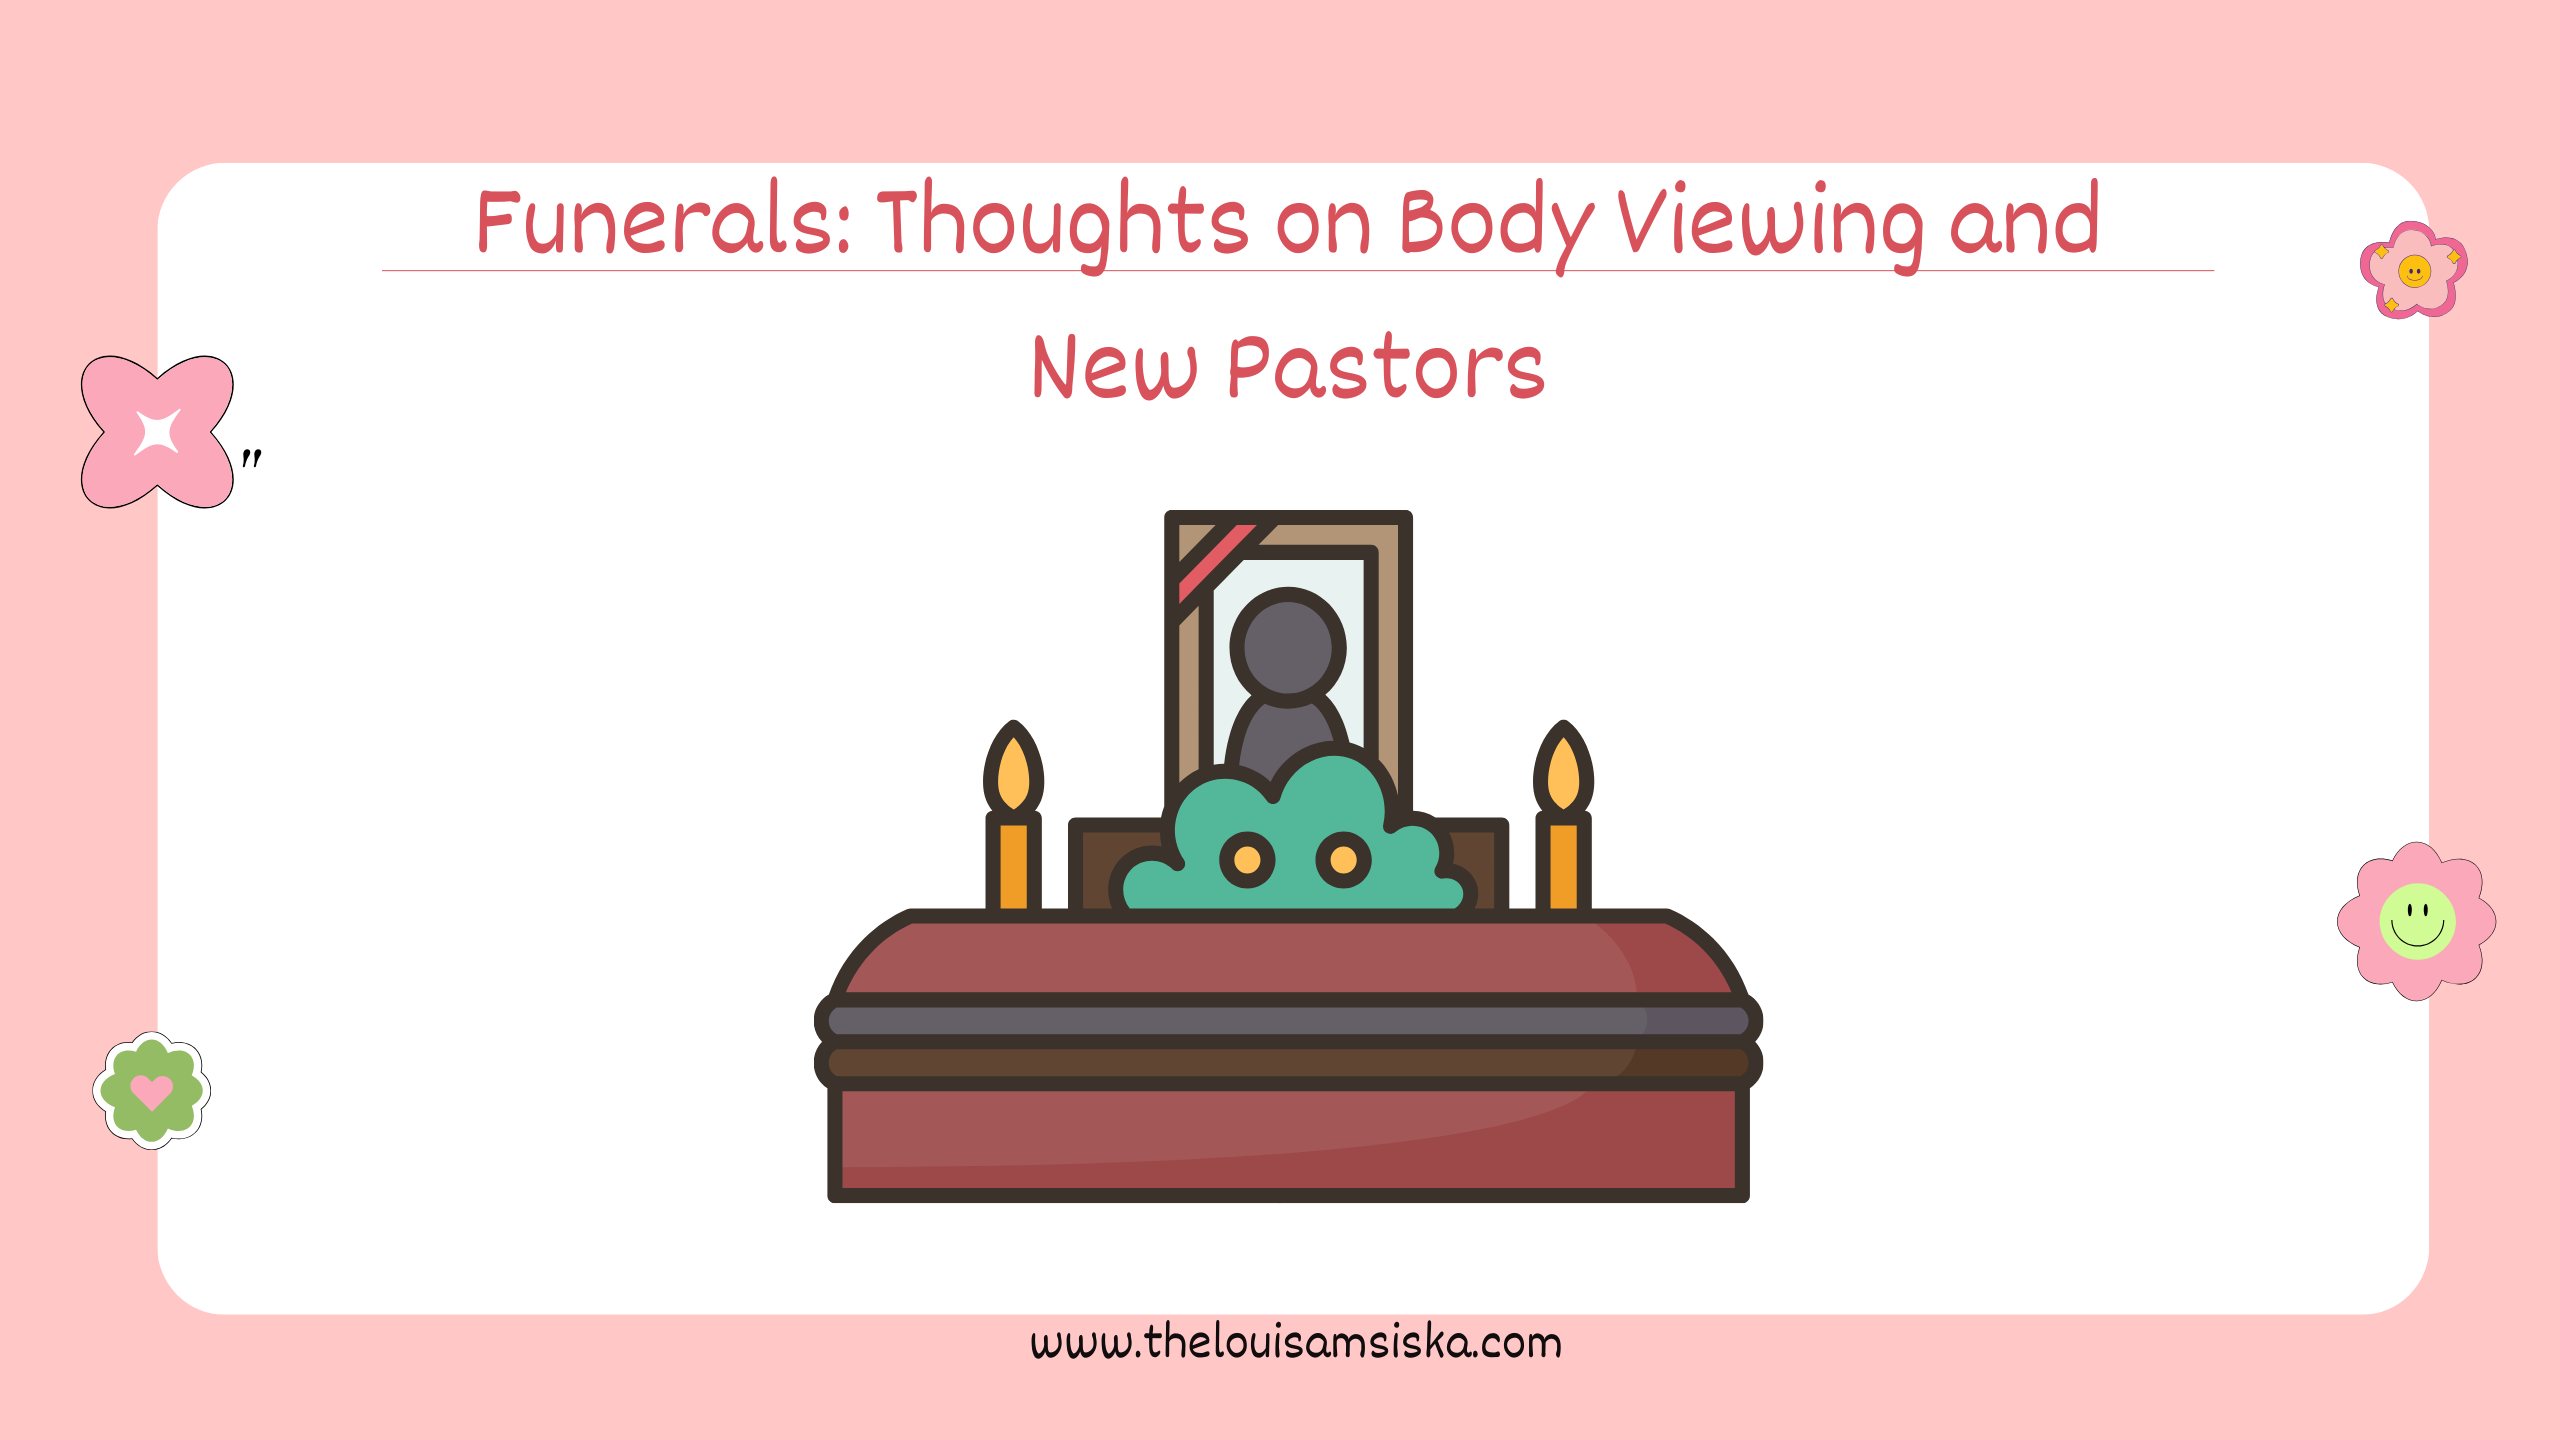 Funerals: Thoughts on Body Viewing and New Pastors